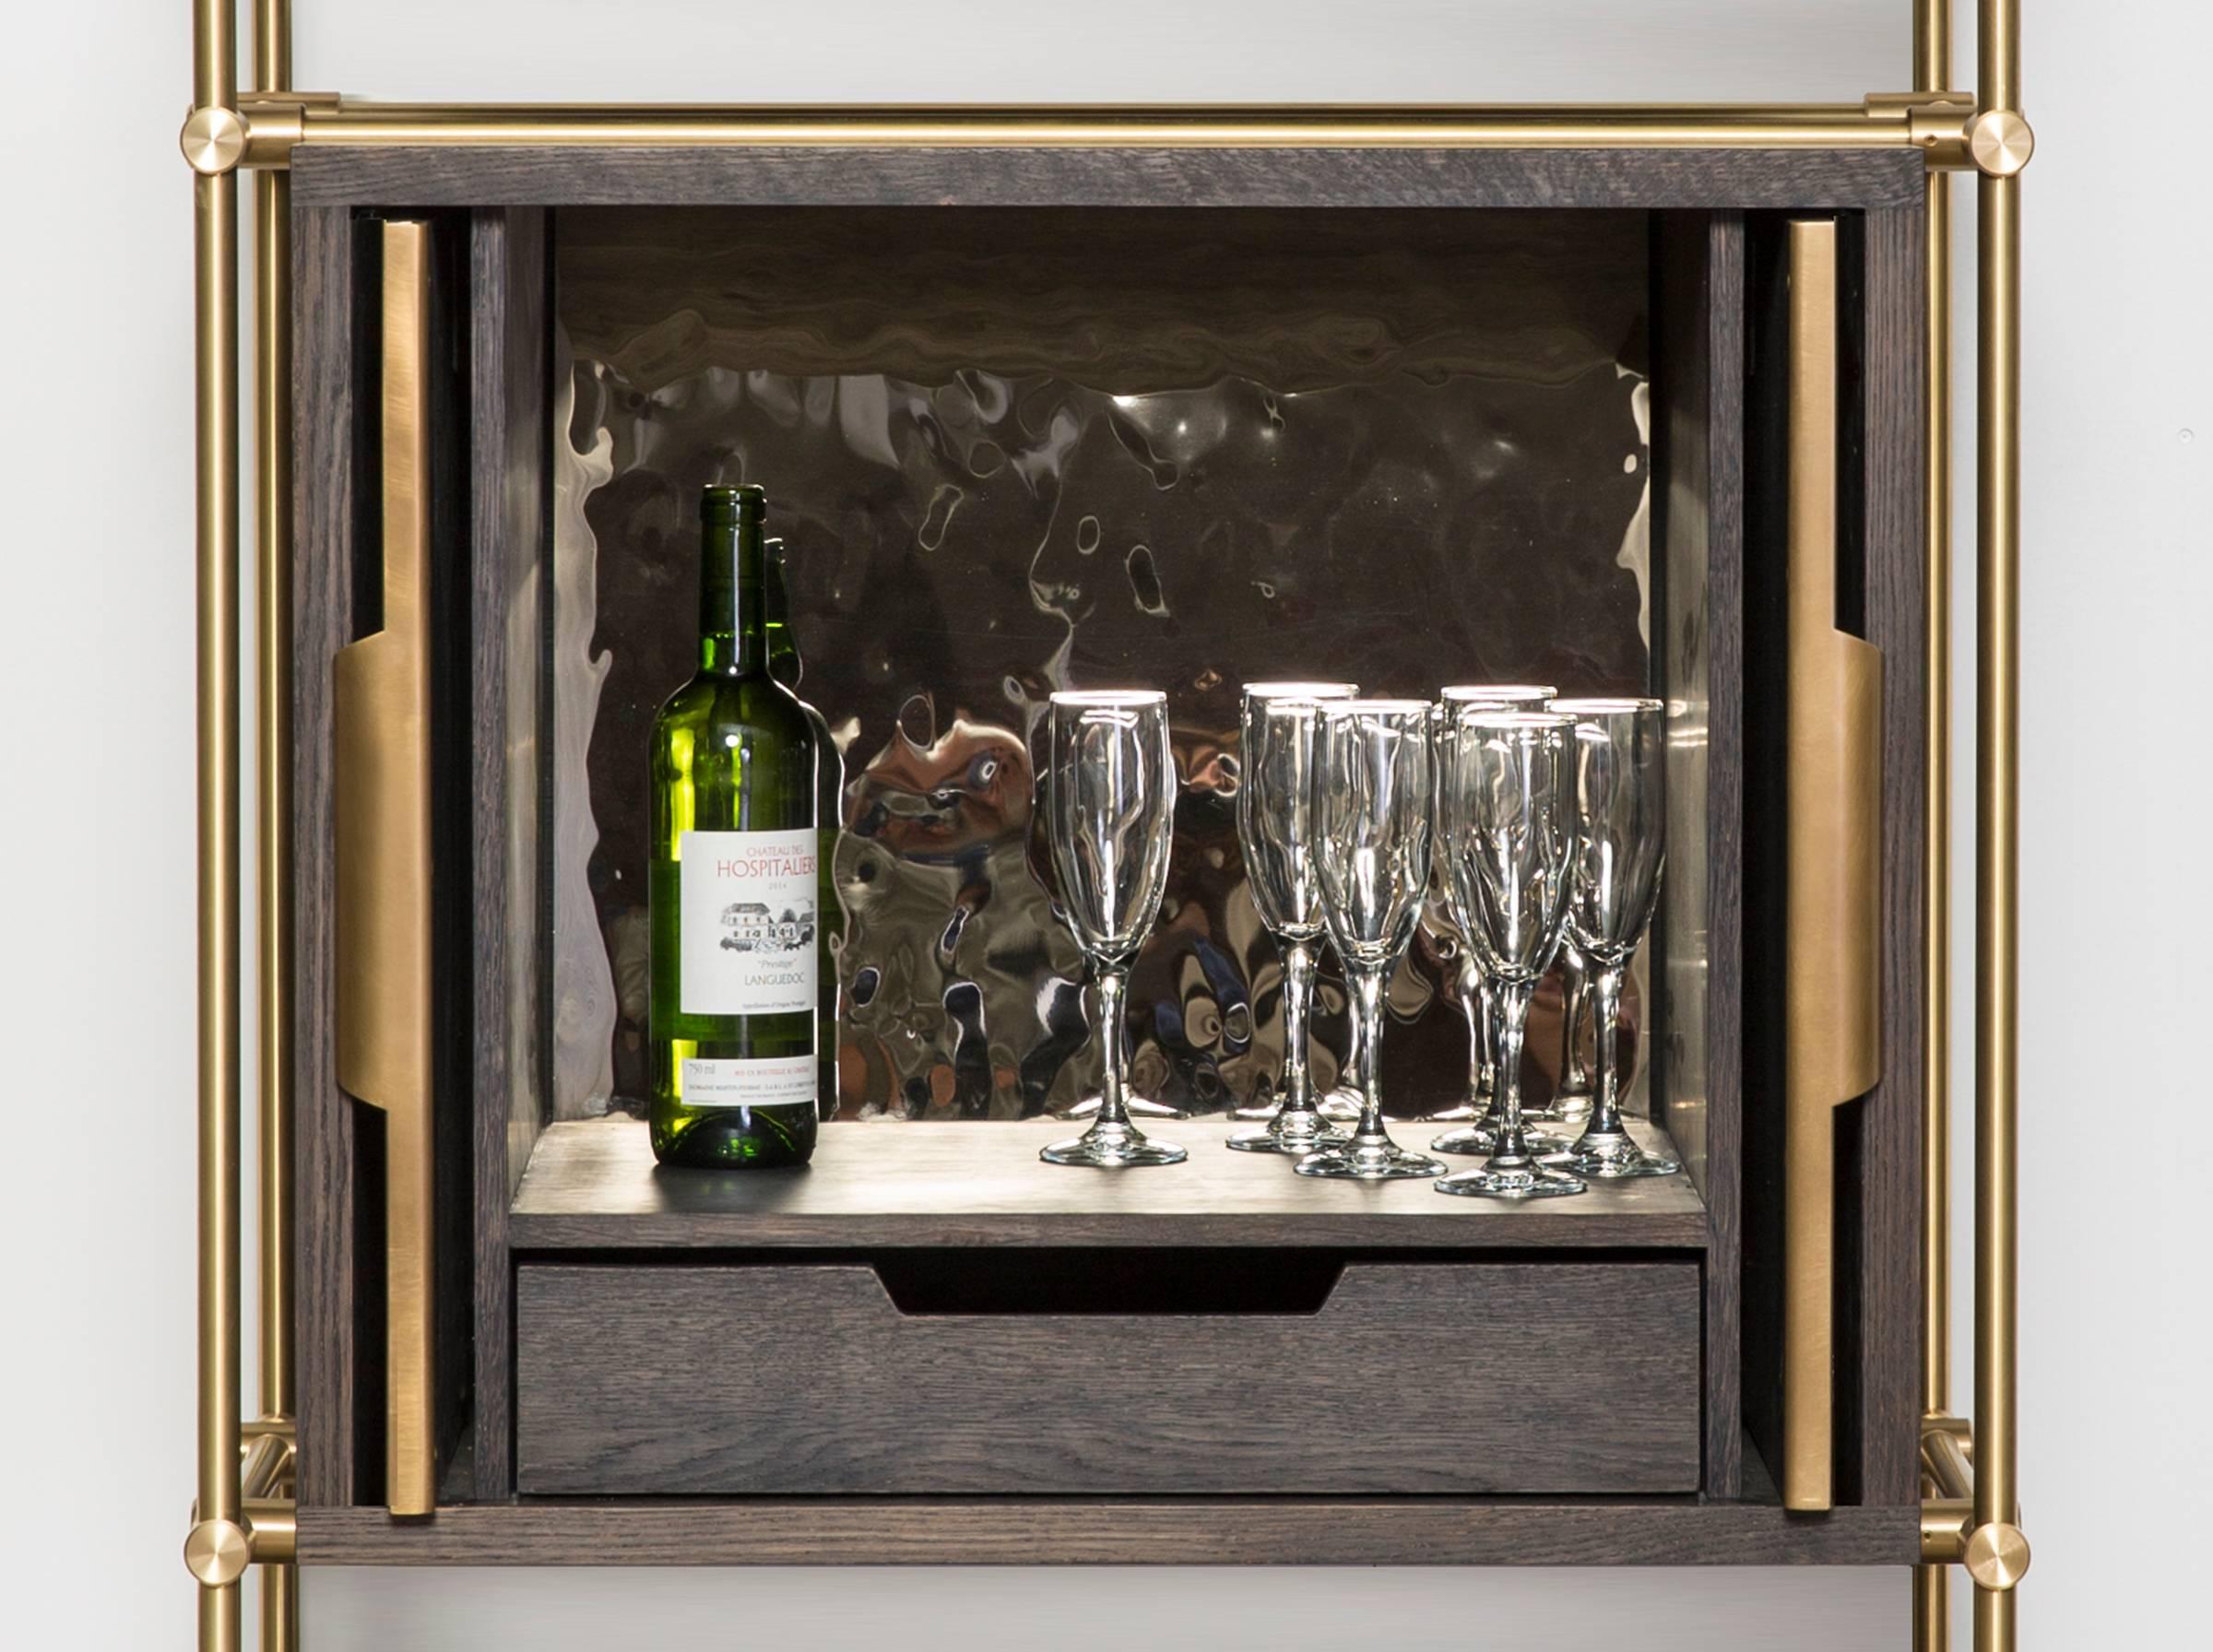 This single bay collector’s shelving unit highlights our carved oak wine shelves as a perfect way to store and display your favorite bottles. Our precision machined brass fittings make each shelf easily adjustable and removable adding to the curated